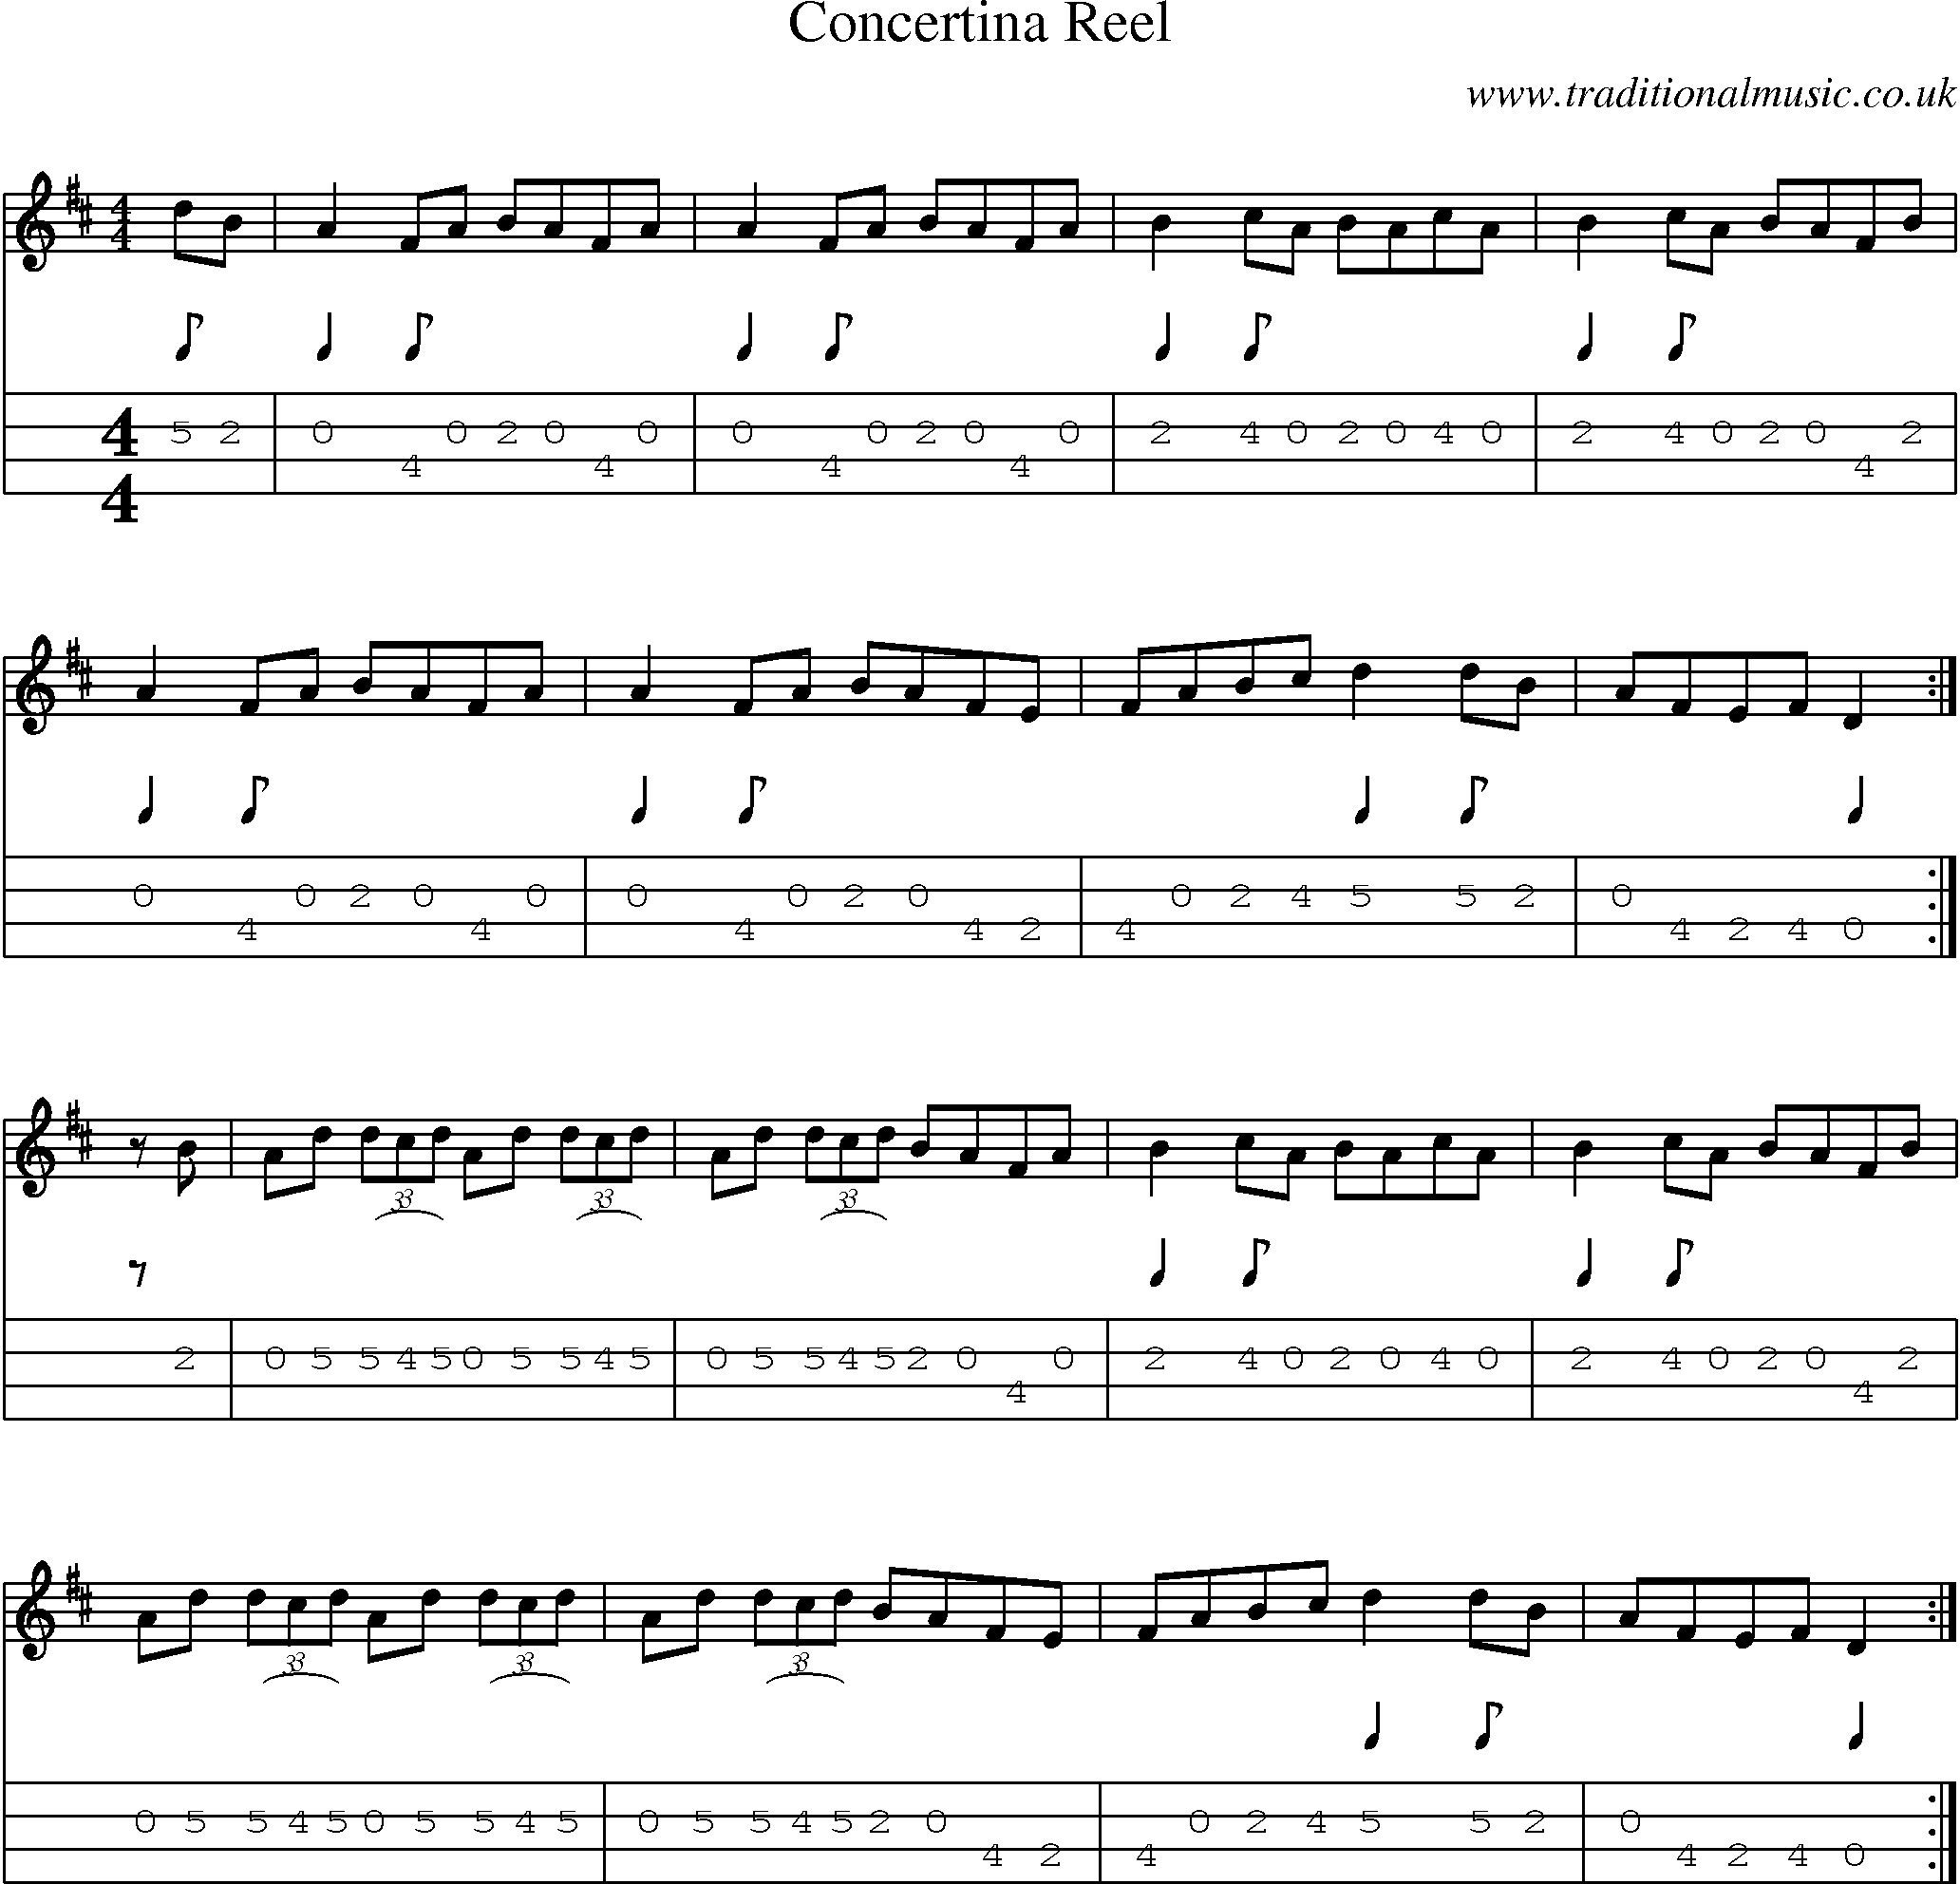 Music Score and Mandolin Tabs for Concertina Reel